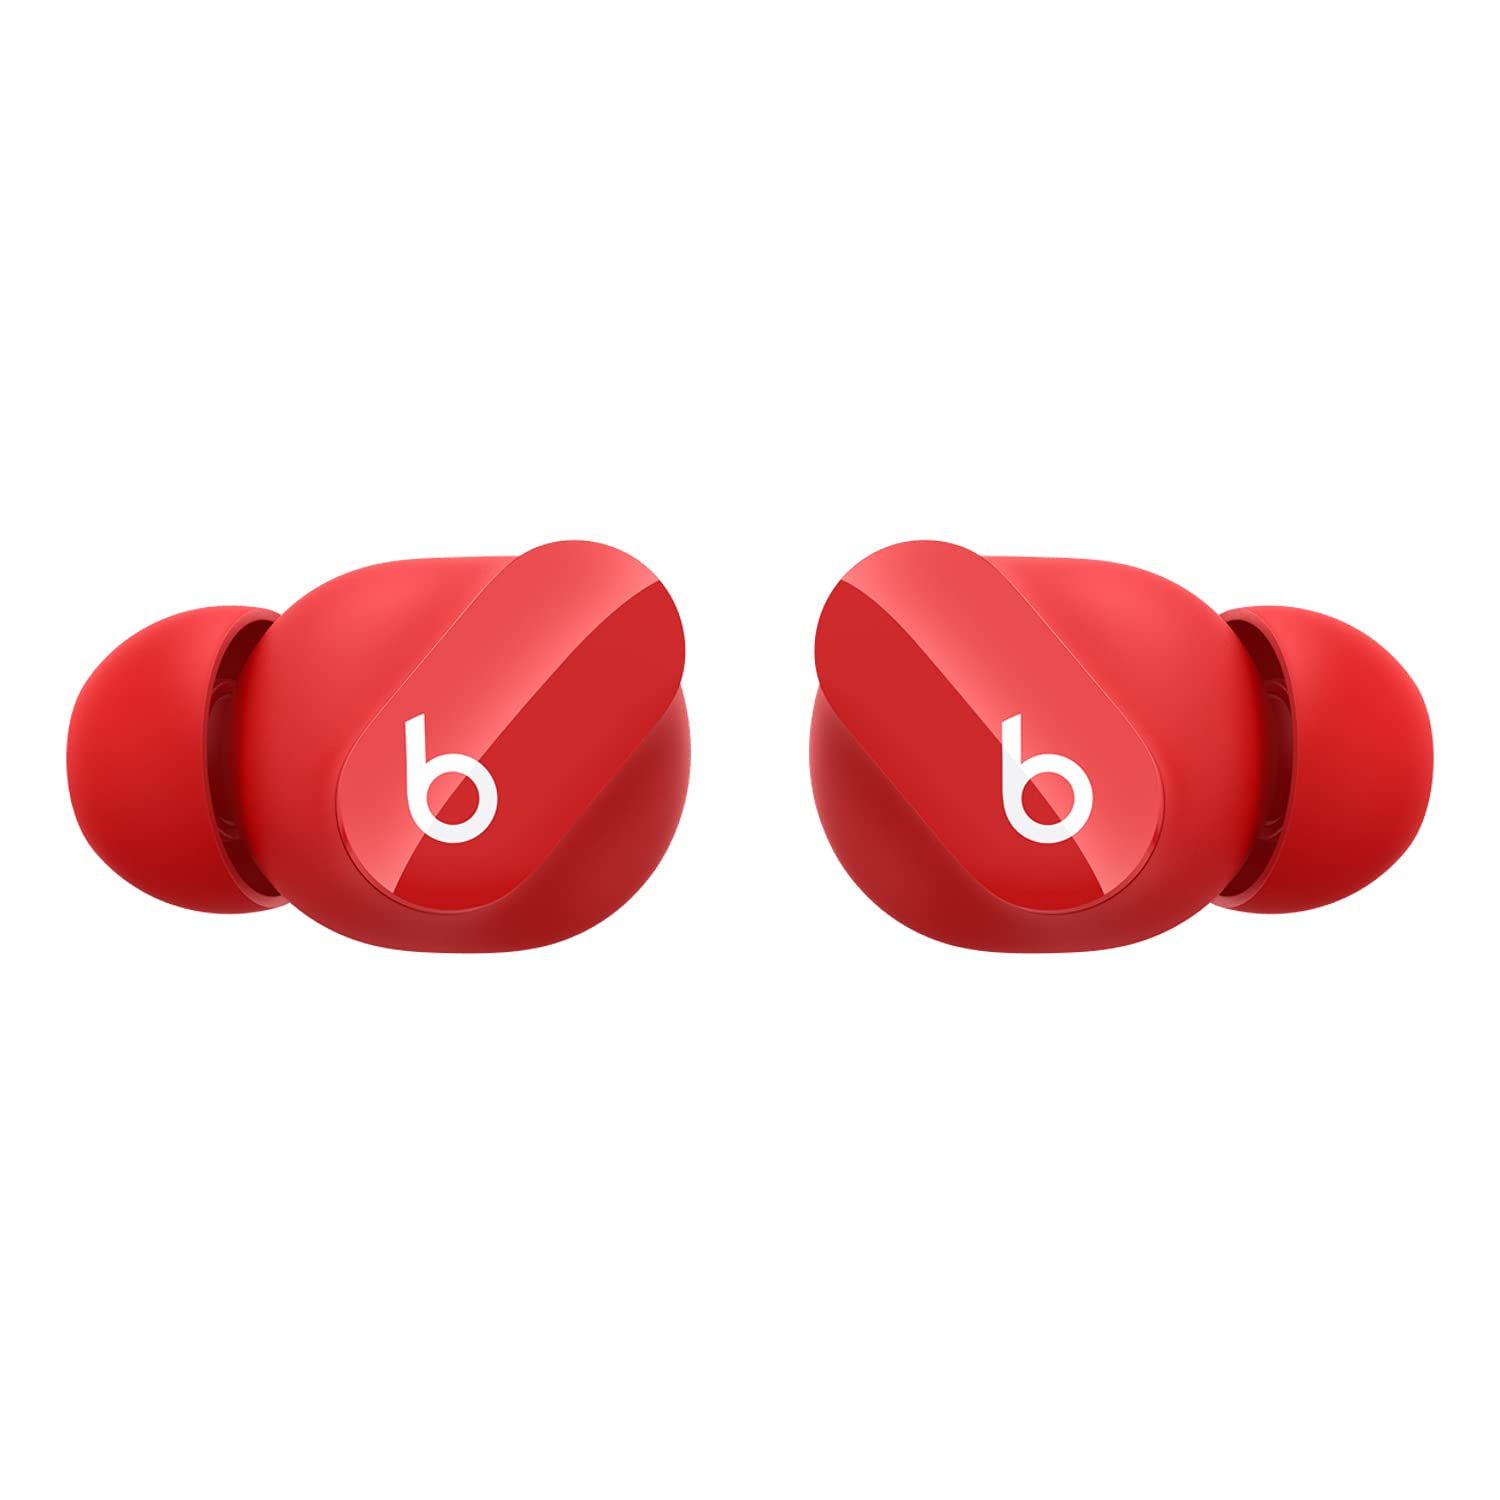 Beats Studio Buds - True Wireless Noise Cancelling Earbuds - Compatible with Apple & Android, Built-in Microphone, IPX4 Rating, Sweat Resistant Earphones, Class 1 Bluetooth Headphones Red